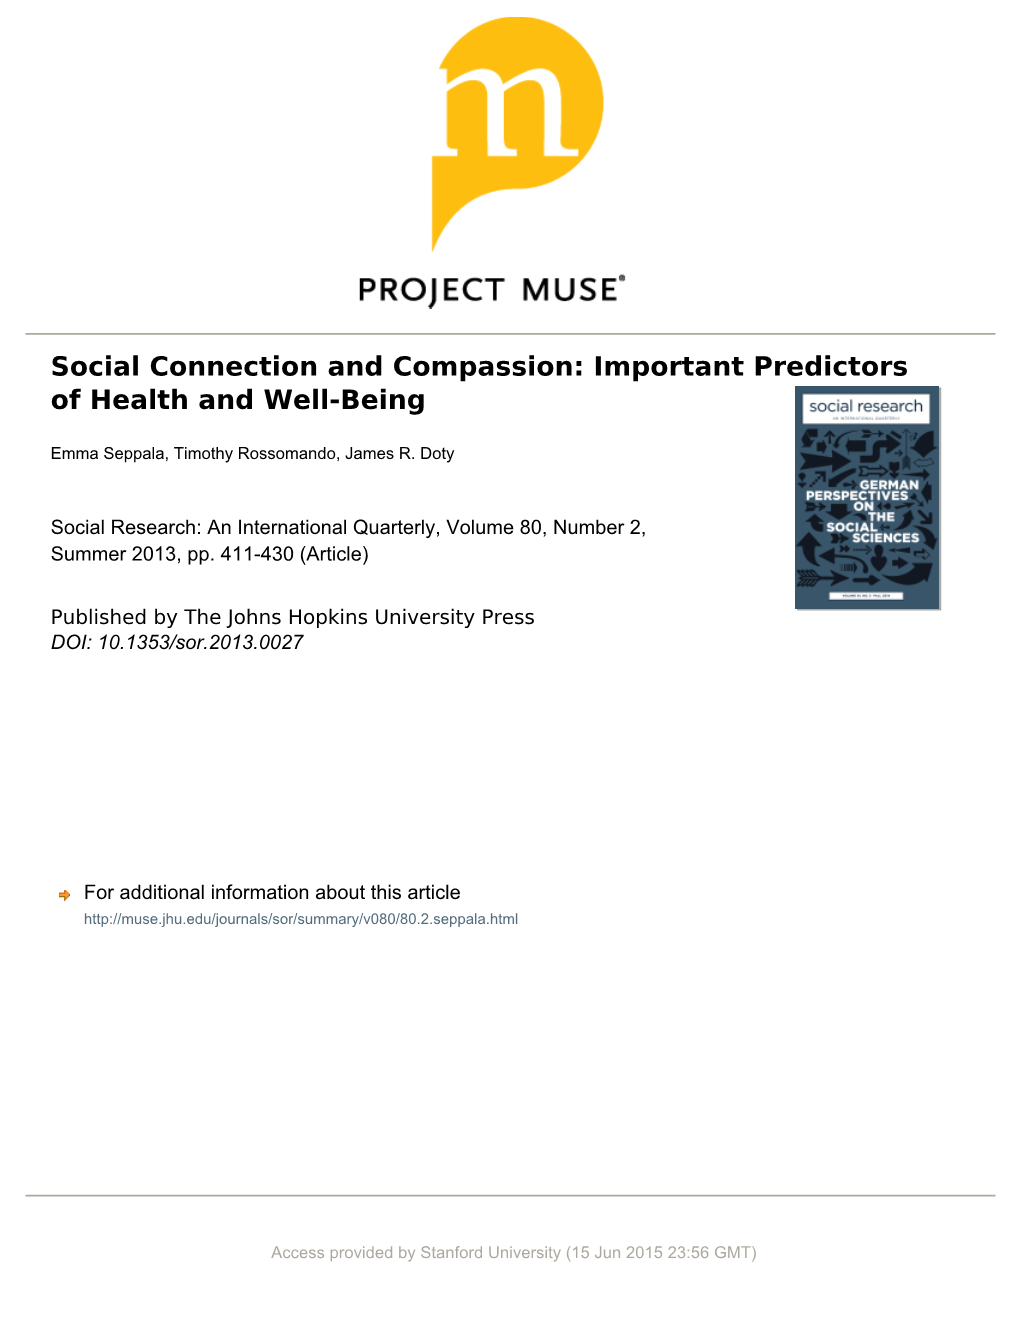 Social Connection and Compassion: Important Predictors of Health and Well-Being